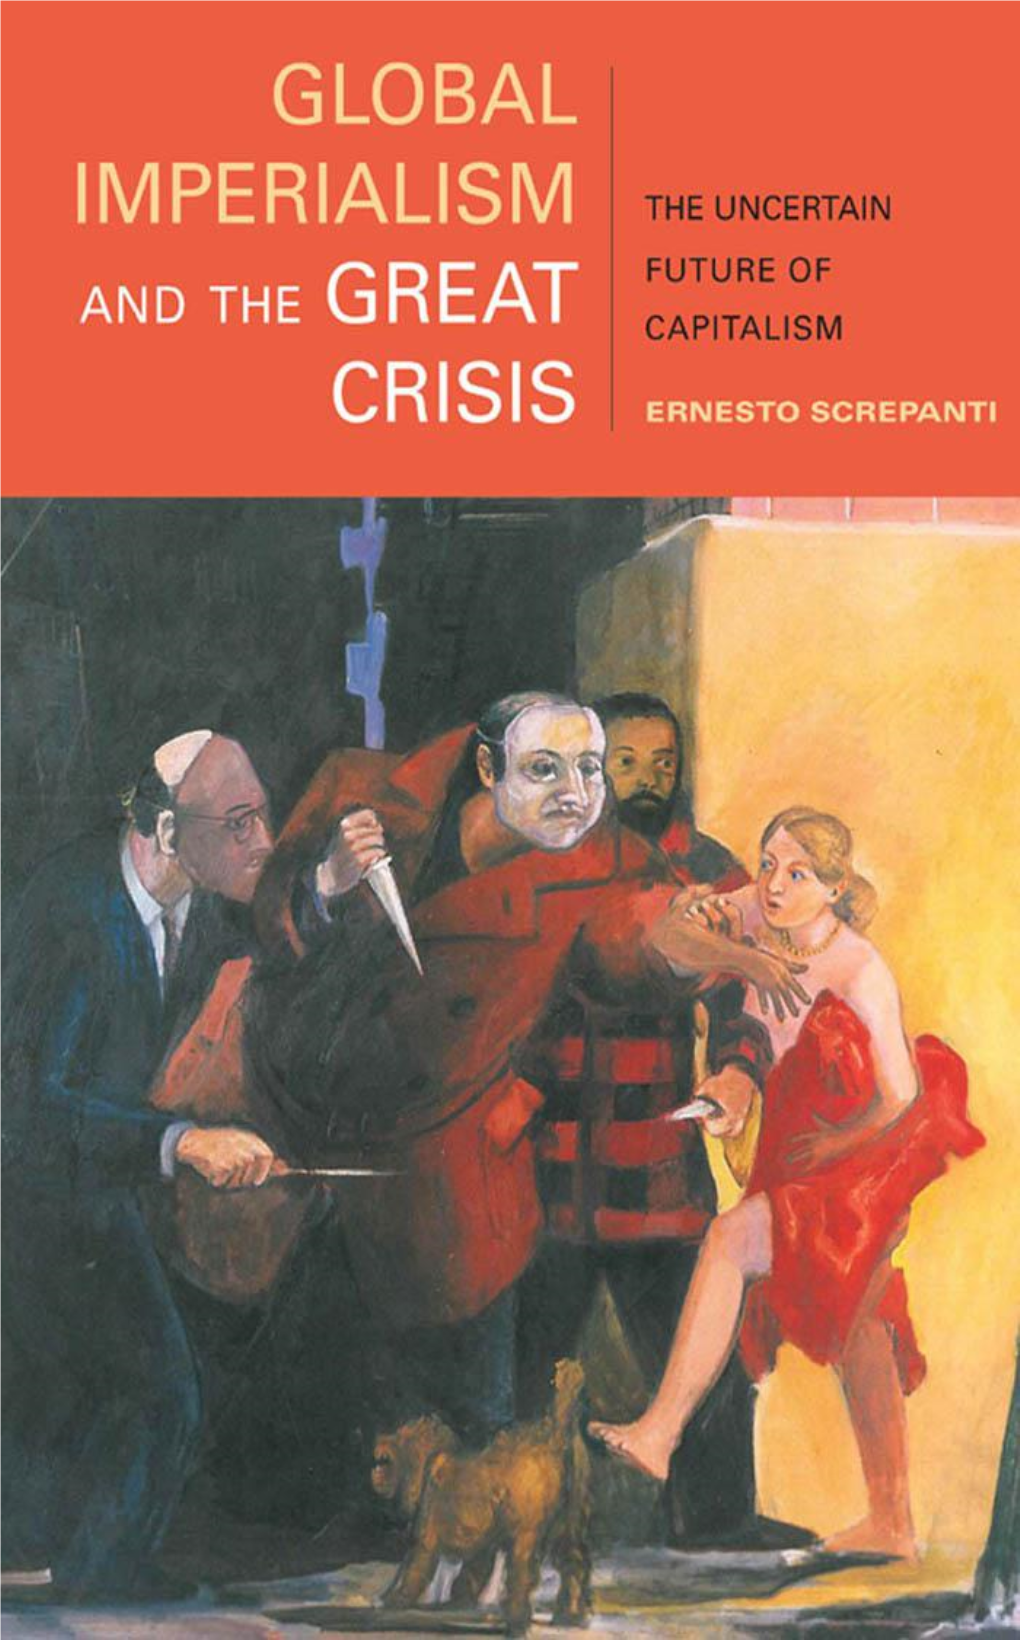 Ernesto Screpanti-Global Imperialism and the Great Crisis The